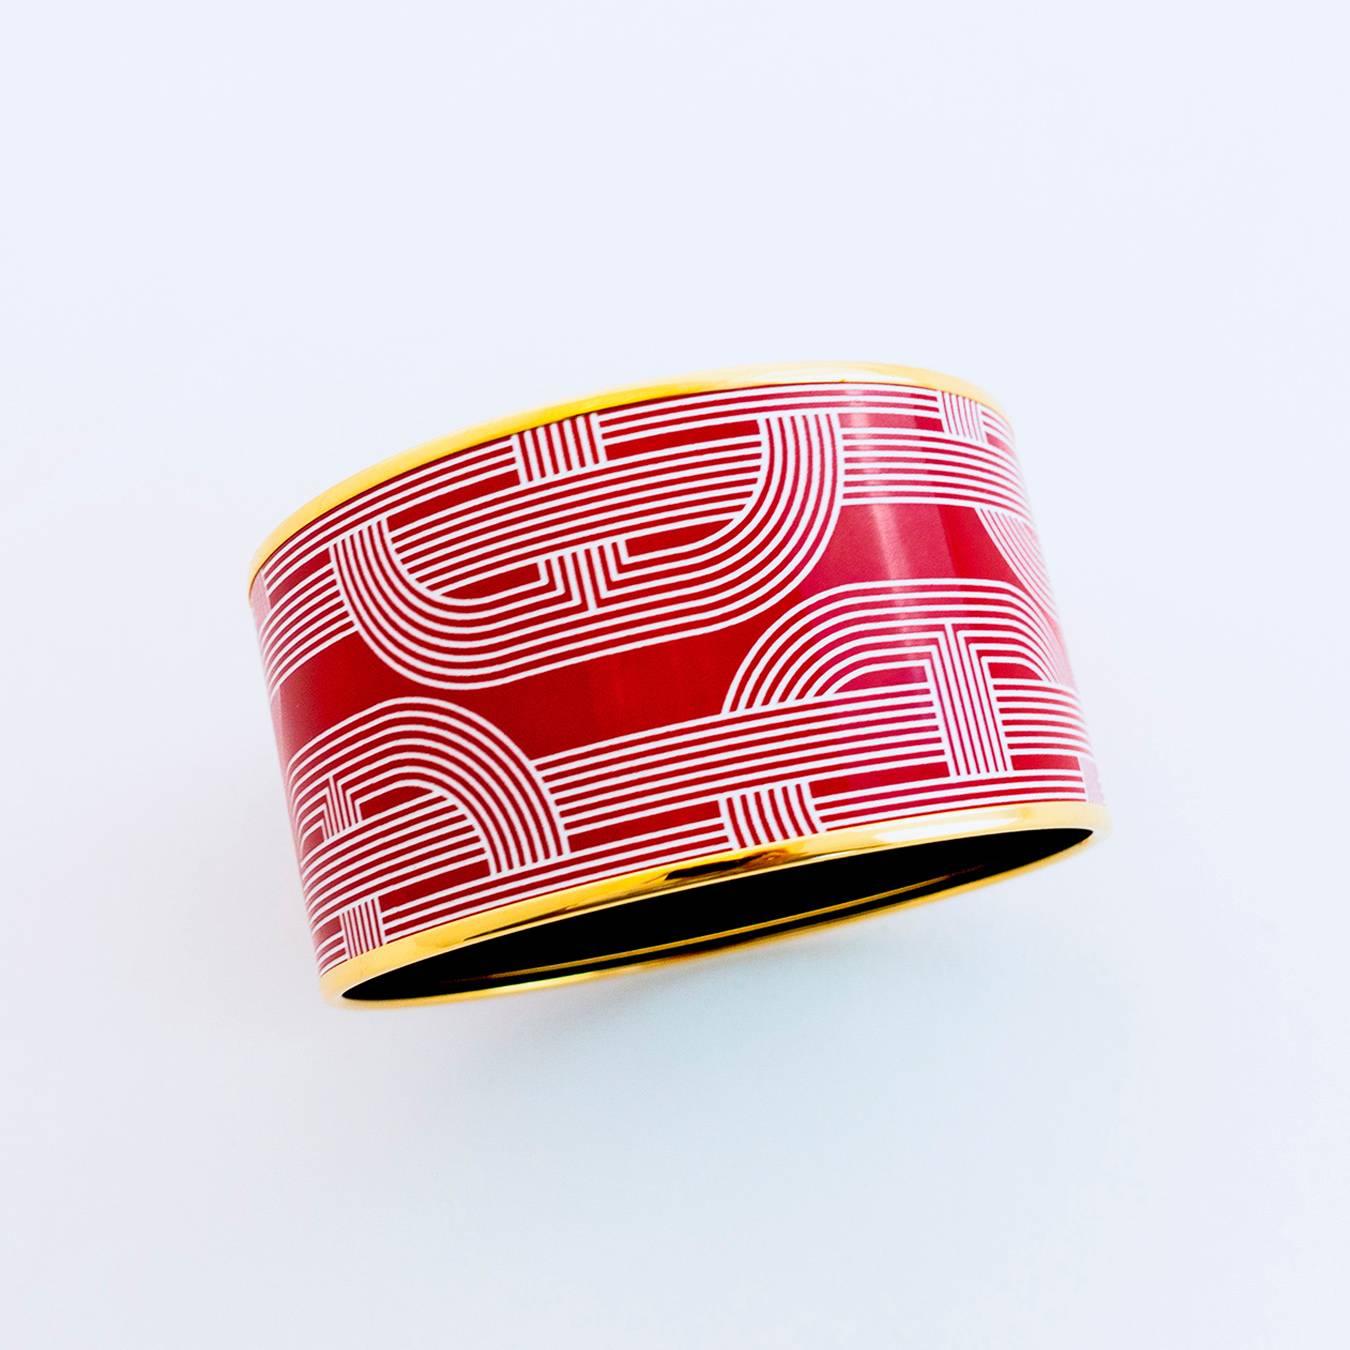 Hermes Circuit 24 Faubourg Rouge Amarante White Enamel Bracelet XL 70 So Chic
Store fresh.  Pristine condition.
Perfect gift!  Coming full set with Hermes velvet pouch, box and ribbon.
Stunning Circuit 24 Faubourg printed enamel